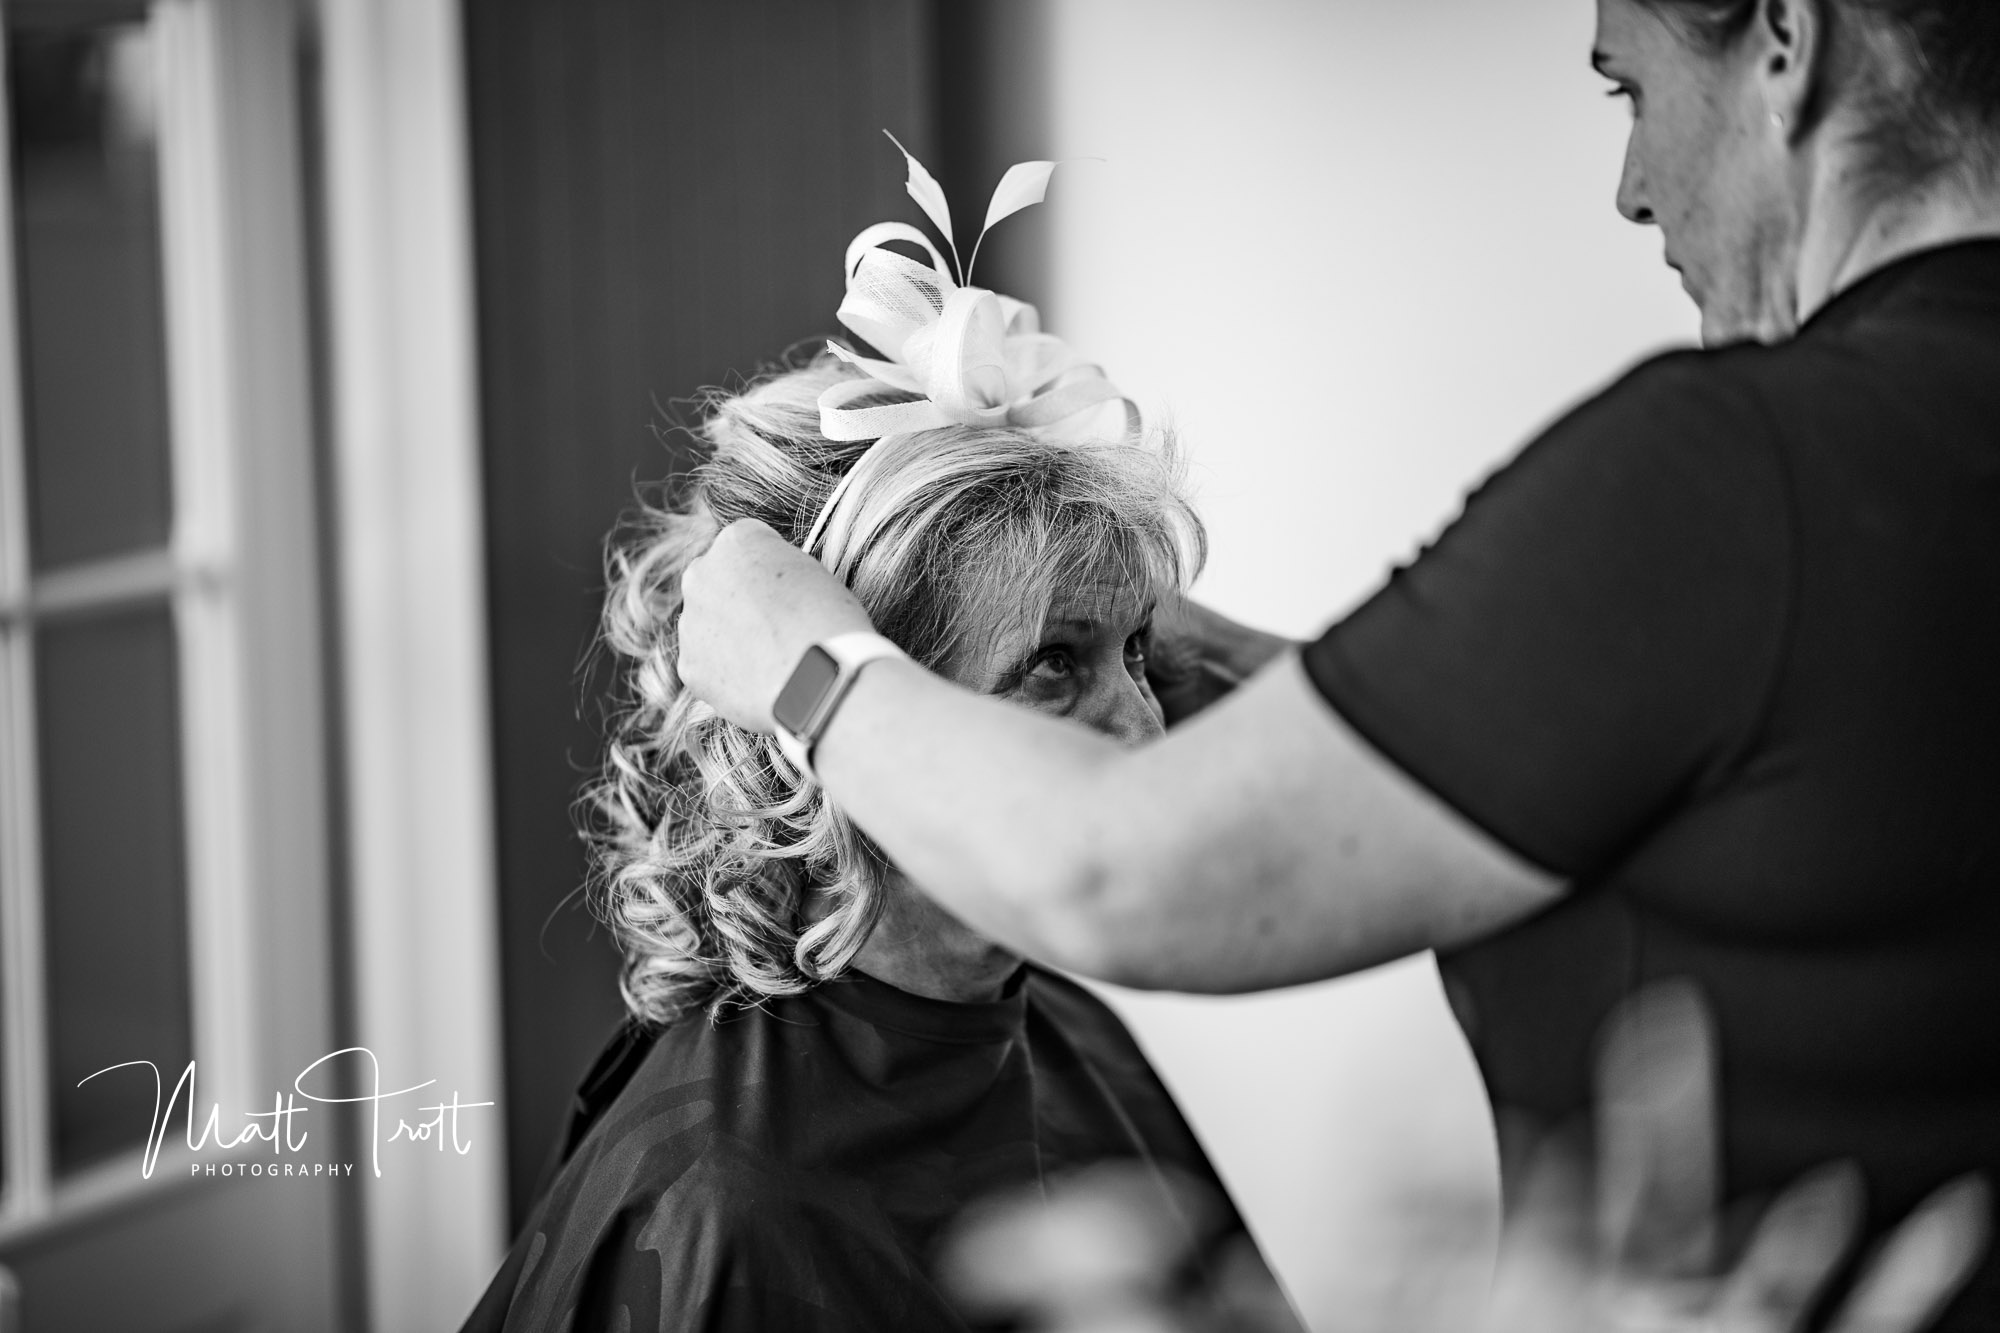 Bridal preparation with the mother of the groom having her fascinator added to her hair